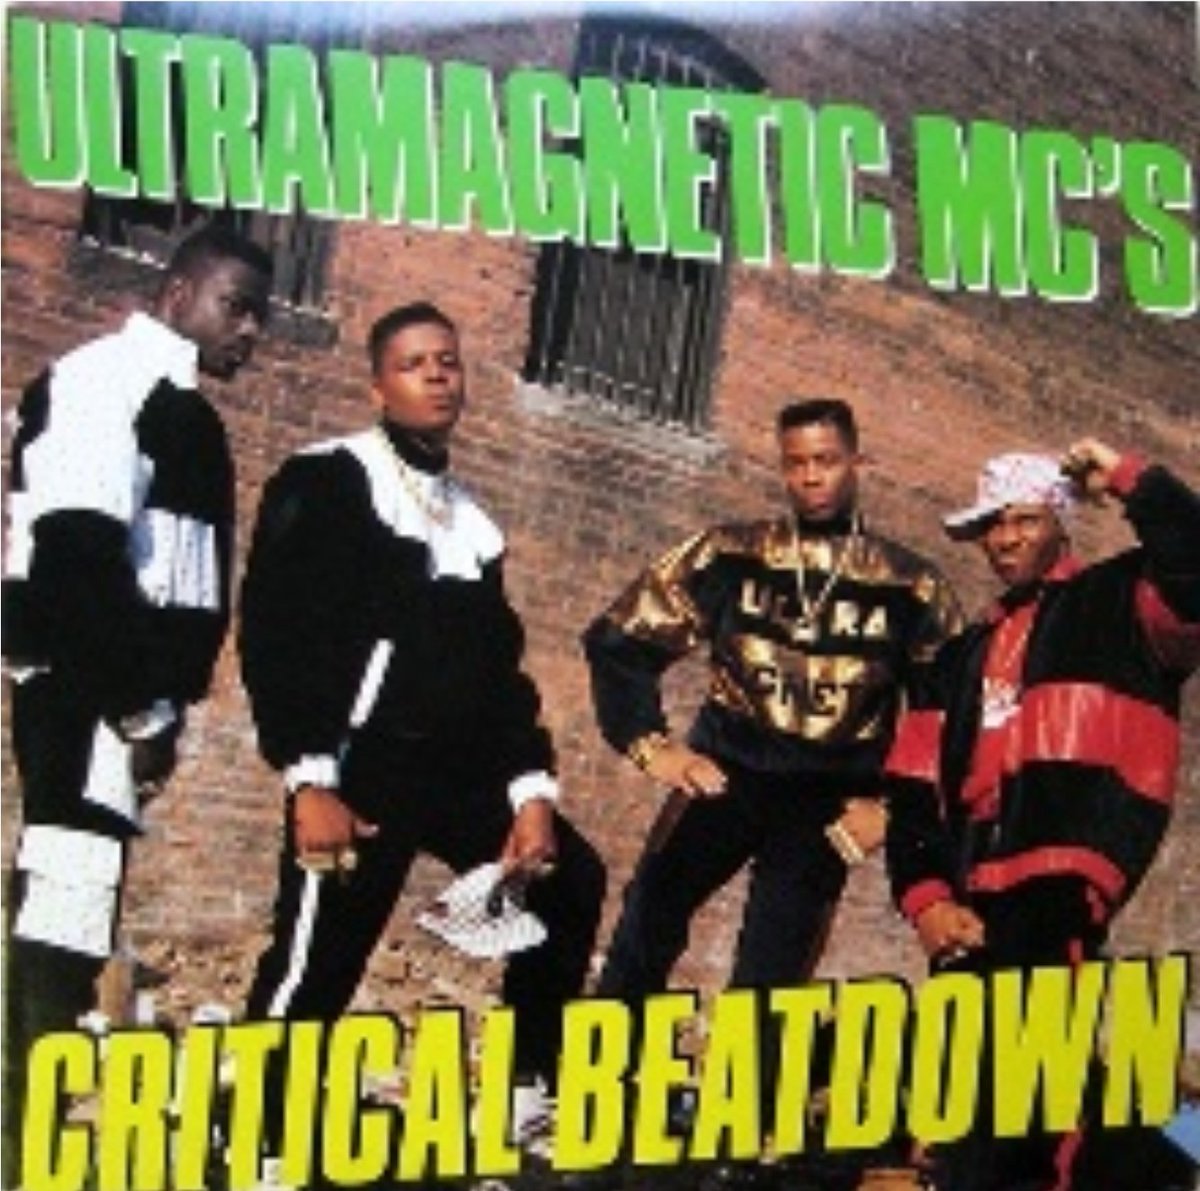 #35YearsAgo today, #UltramagneticMCs released the critically acclaimed debut album #CriticalBeatdown. Produced by Ced-Gee primarily around the SP1200, the album is regarded as one of the most important hip hop albums. The crew were members of the #NewYorkCityBreakers. #KoolKeith